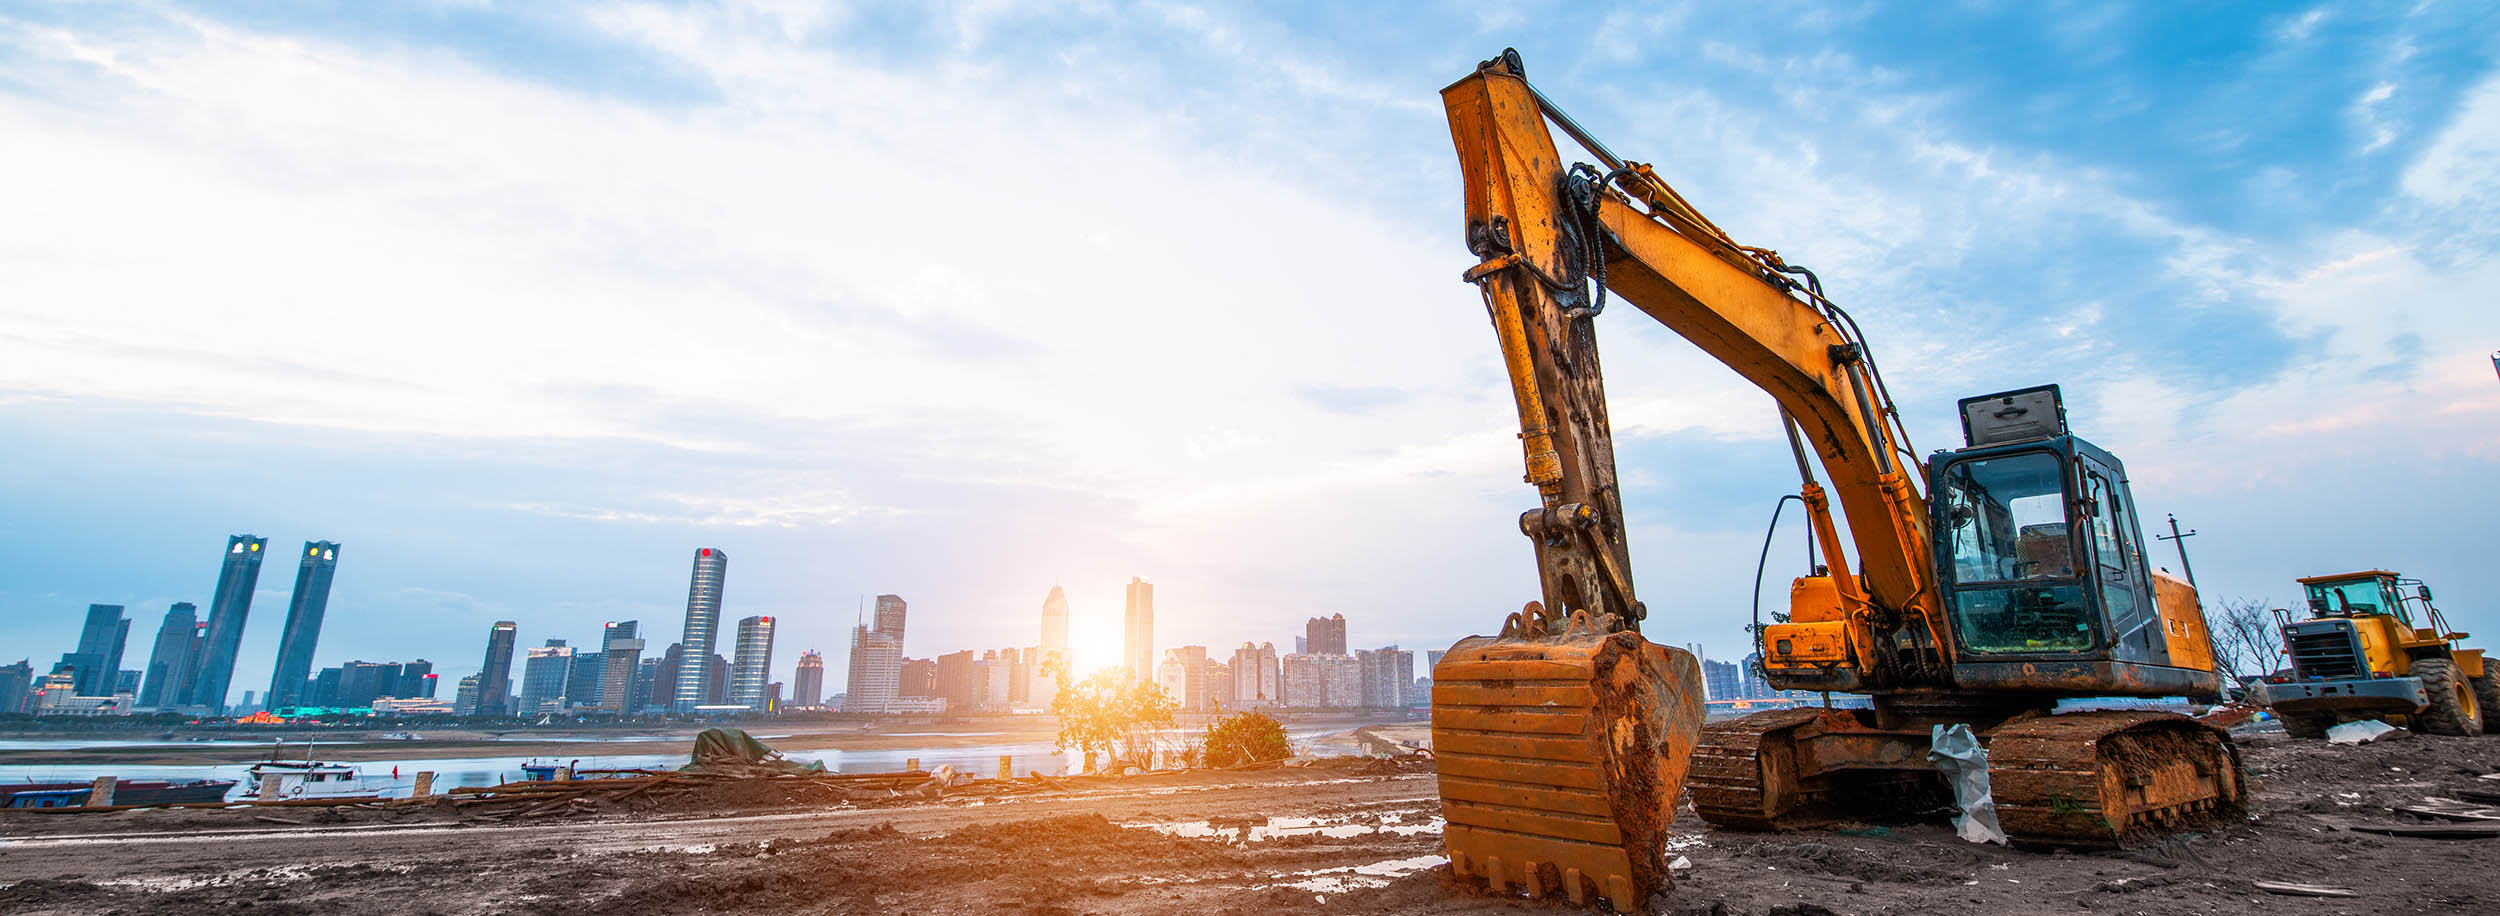 HBS Systems Dealership Software industry leading excavator solution